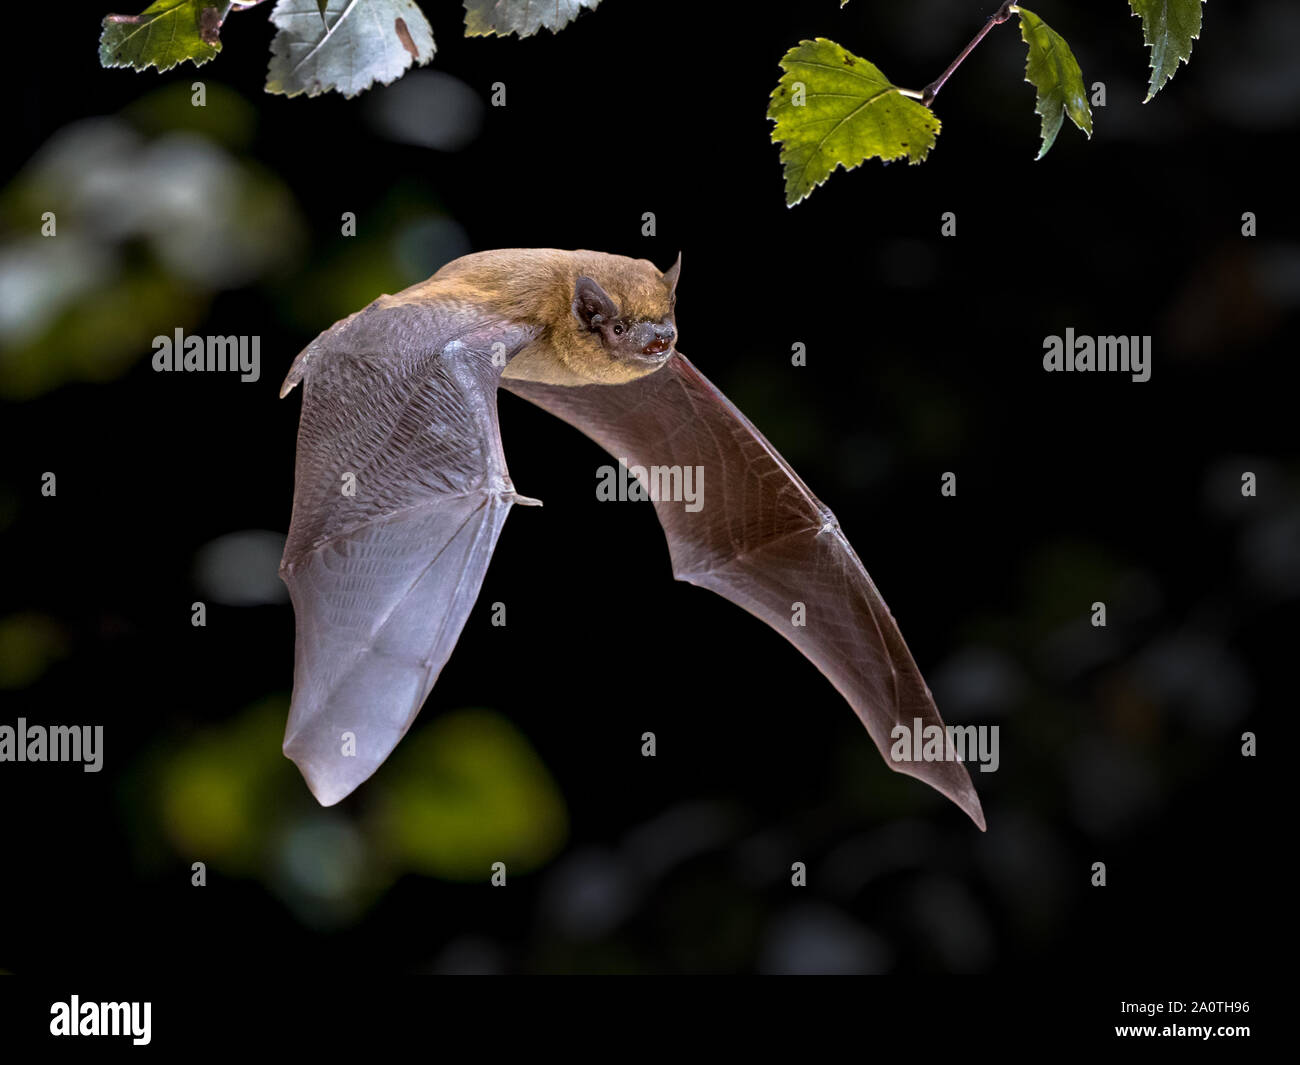 Flying Pipistrelle bat (Pipistrellus pipistrellus) action shot of hunting animal in natural forest background. This species is know for roosting and l Stock Photo